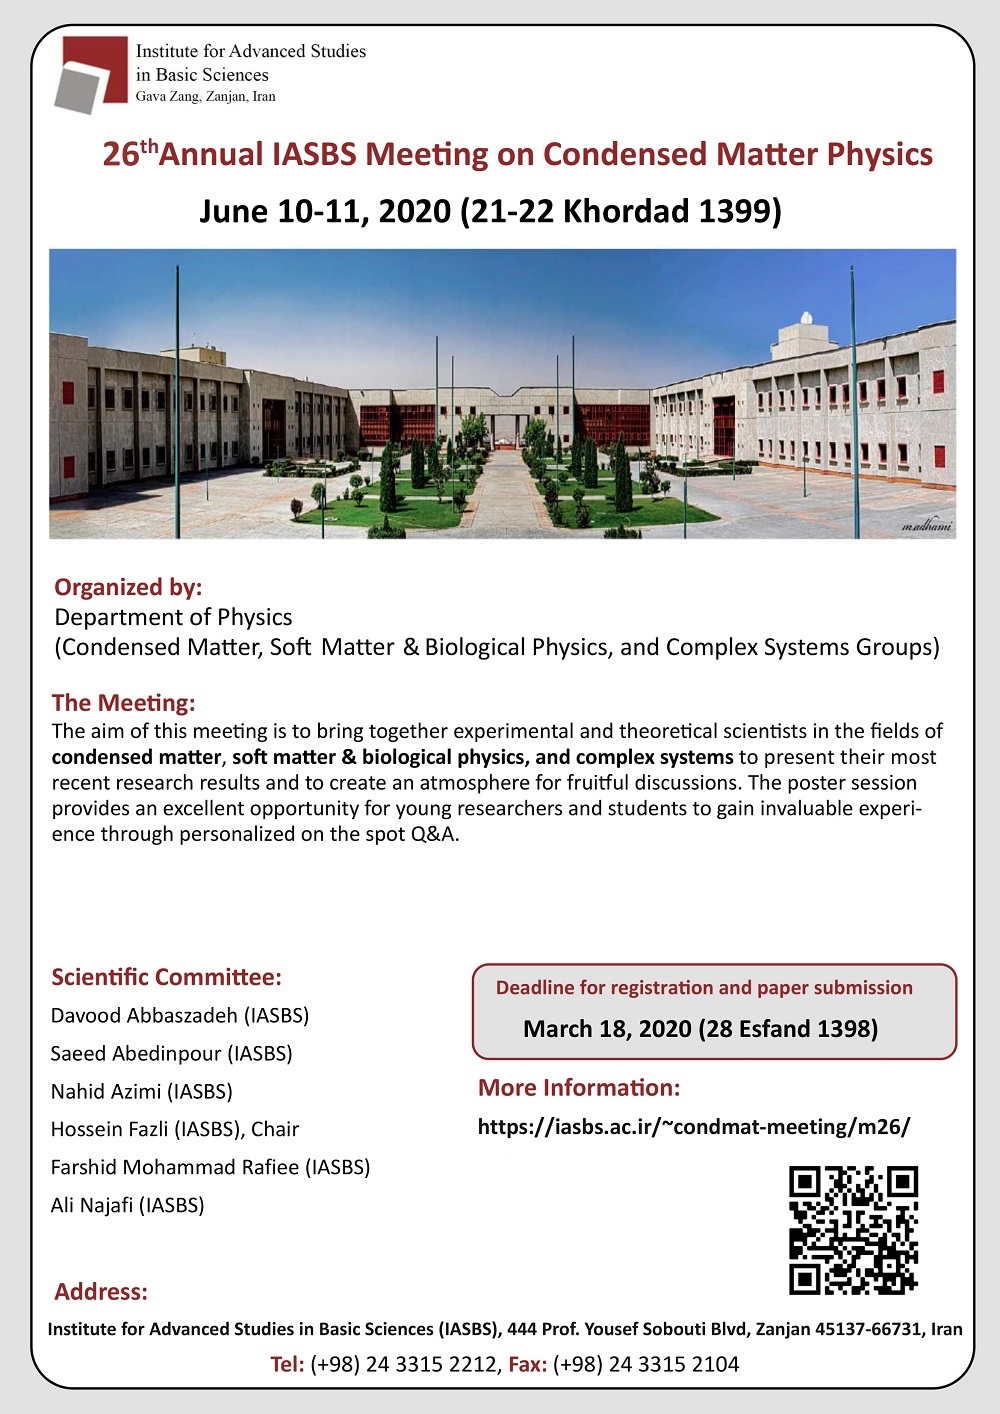 The 26th Annual IASBS Meeting on Condensed Matter Physics has been canceled